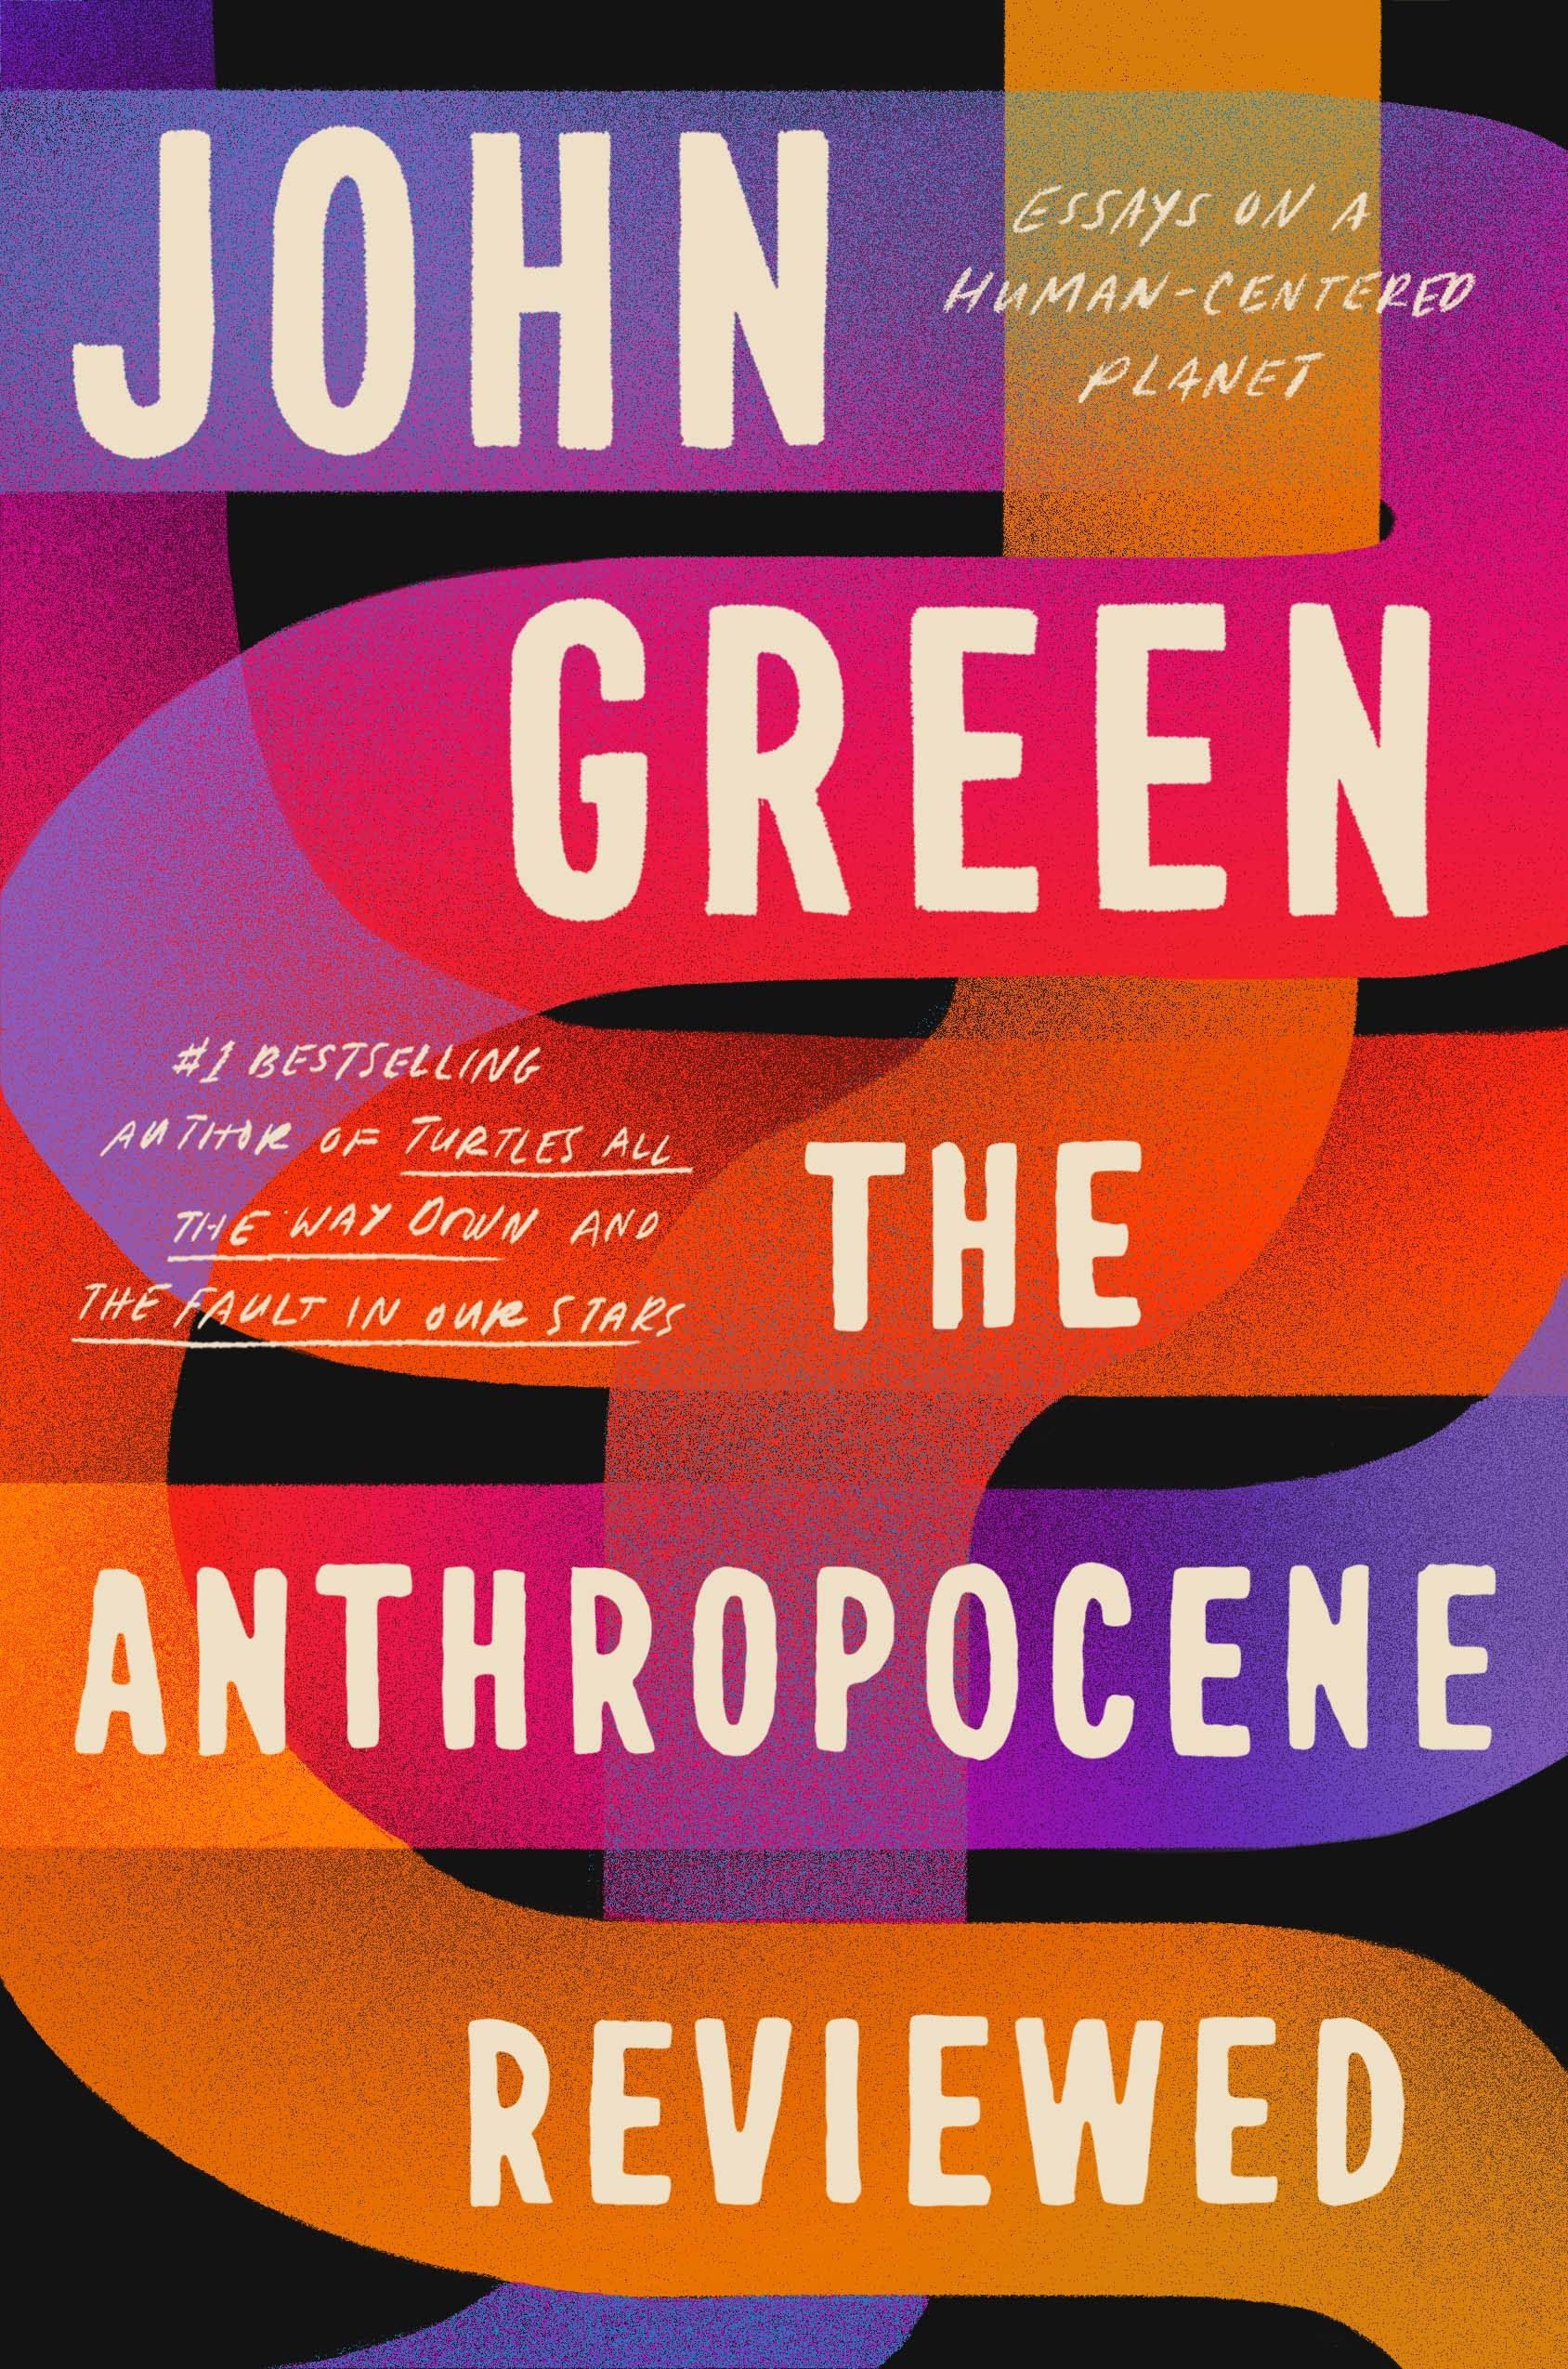 The Anthropocene Reviewed: Essays on a human-centered planet PDF